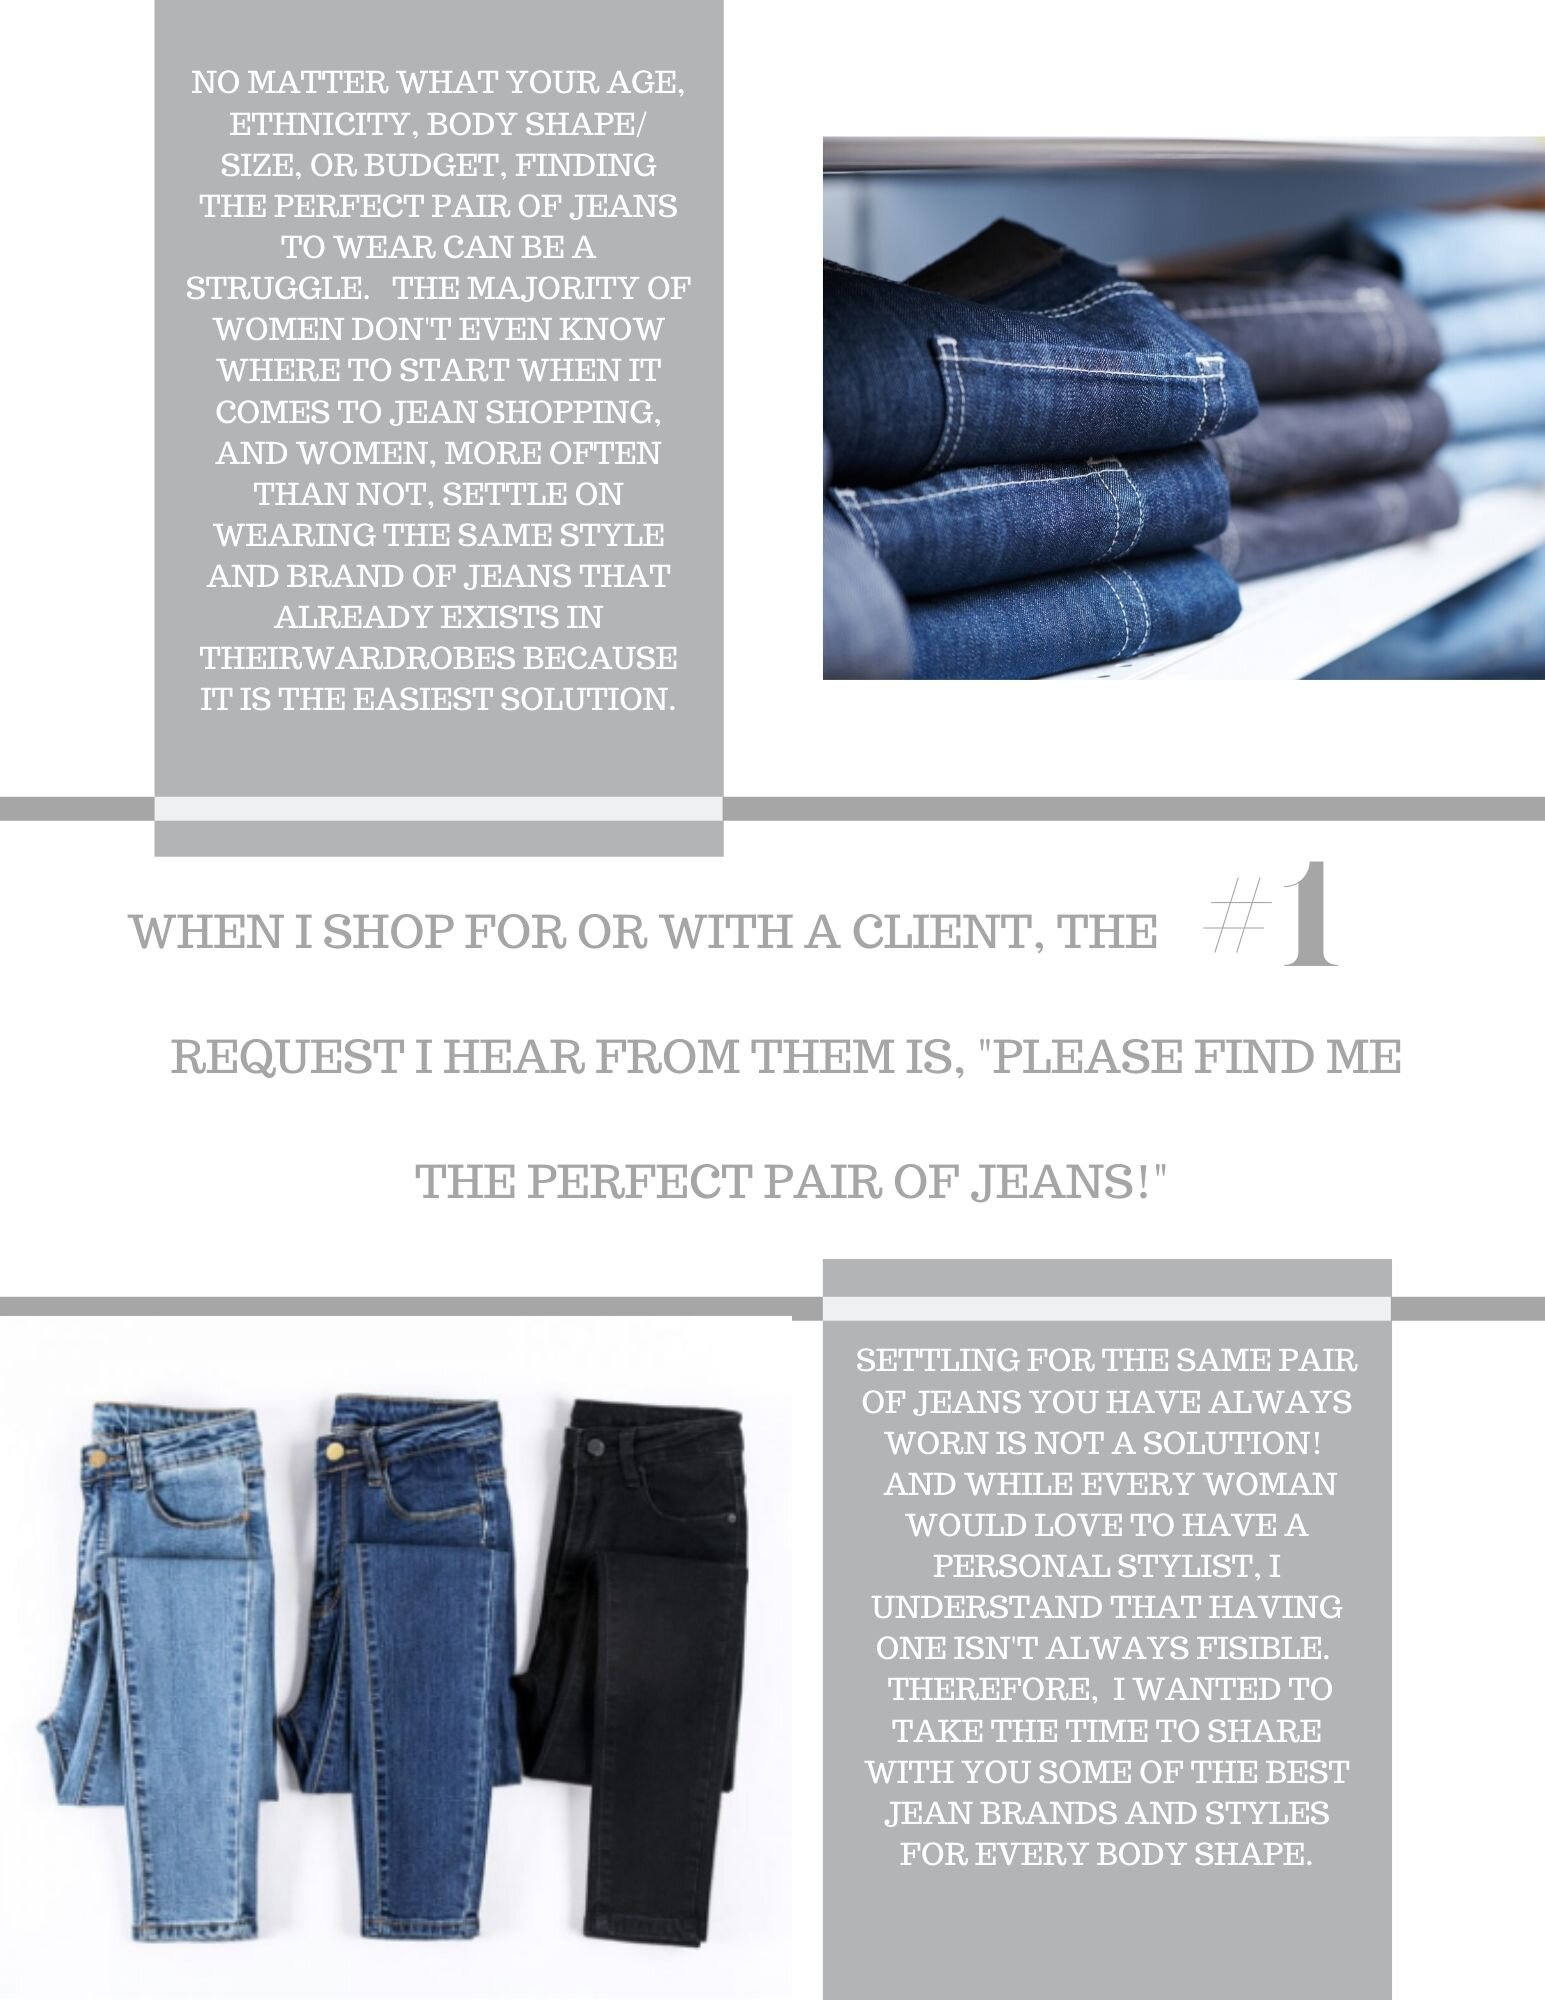 The Ideal Closet-Finding the Best Jeans for Every Body Type